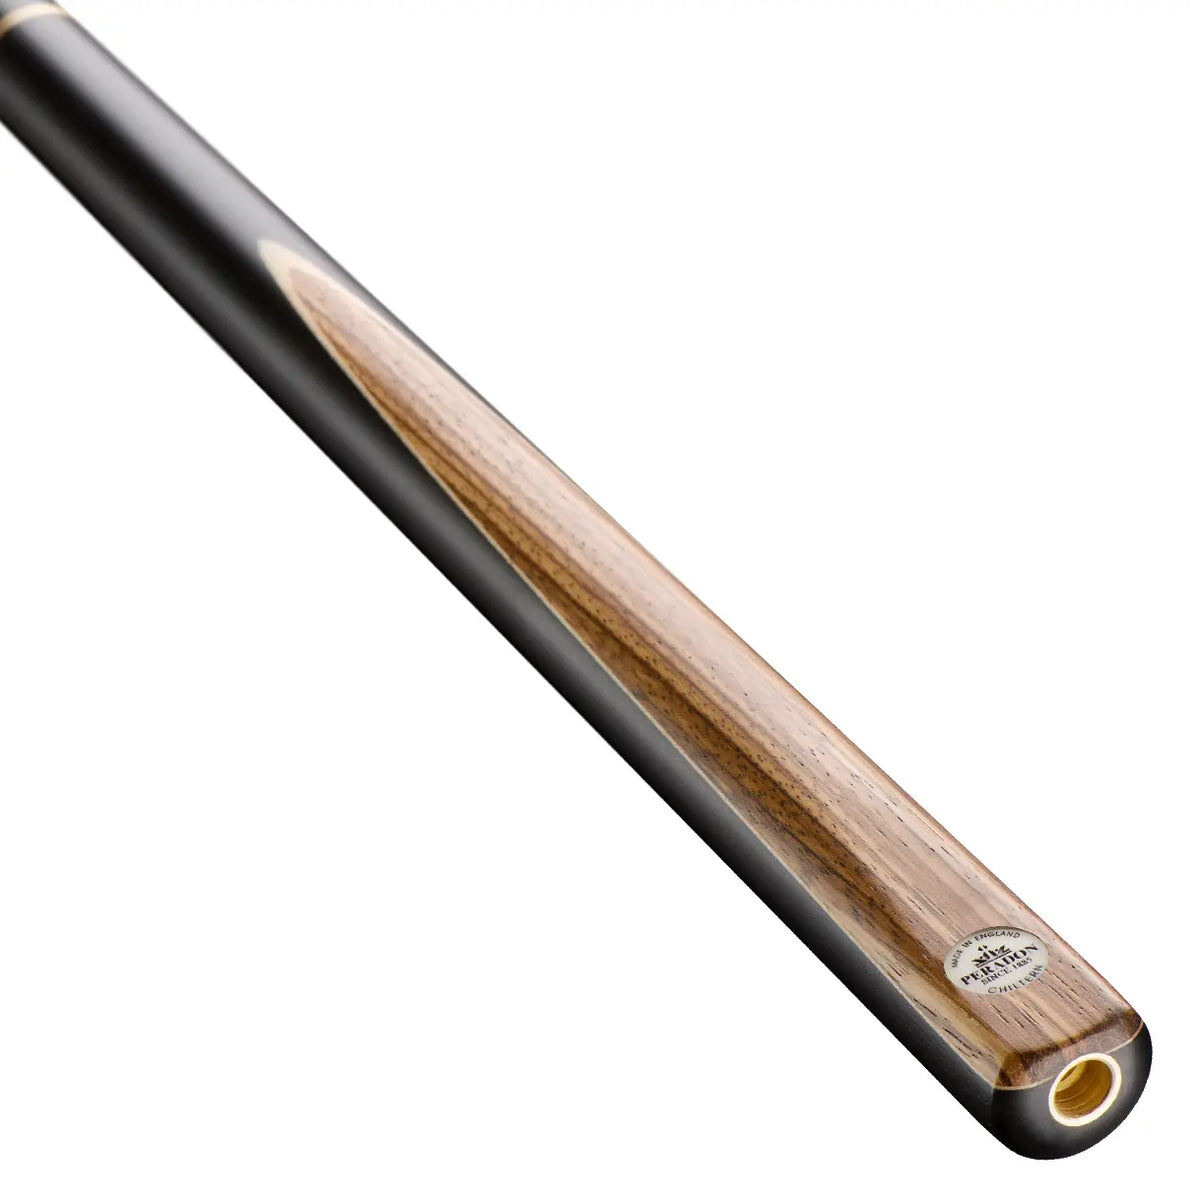 Peradon Chiltern 3/4 Jointed Snooker Cue. On angle view